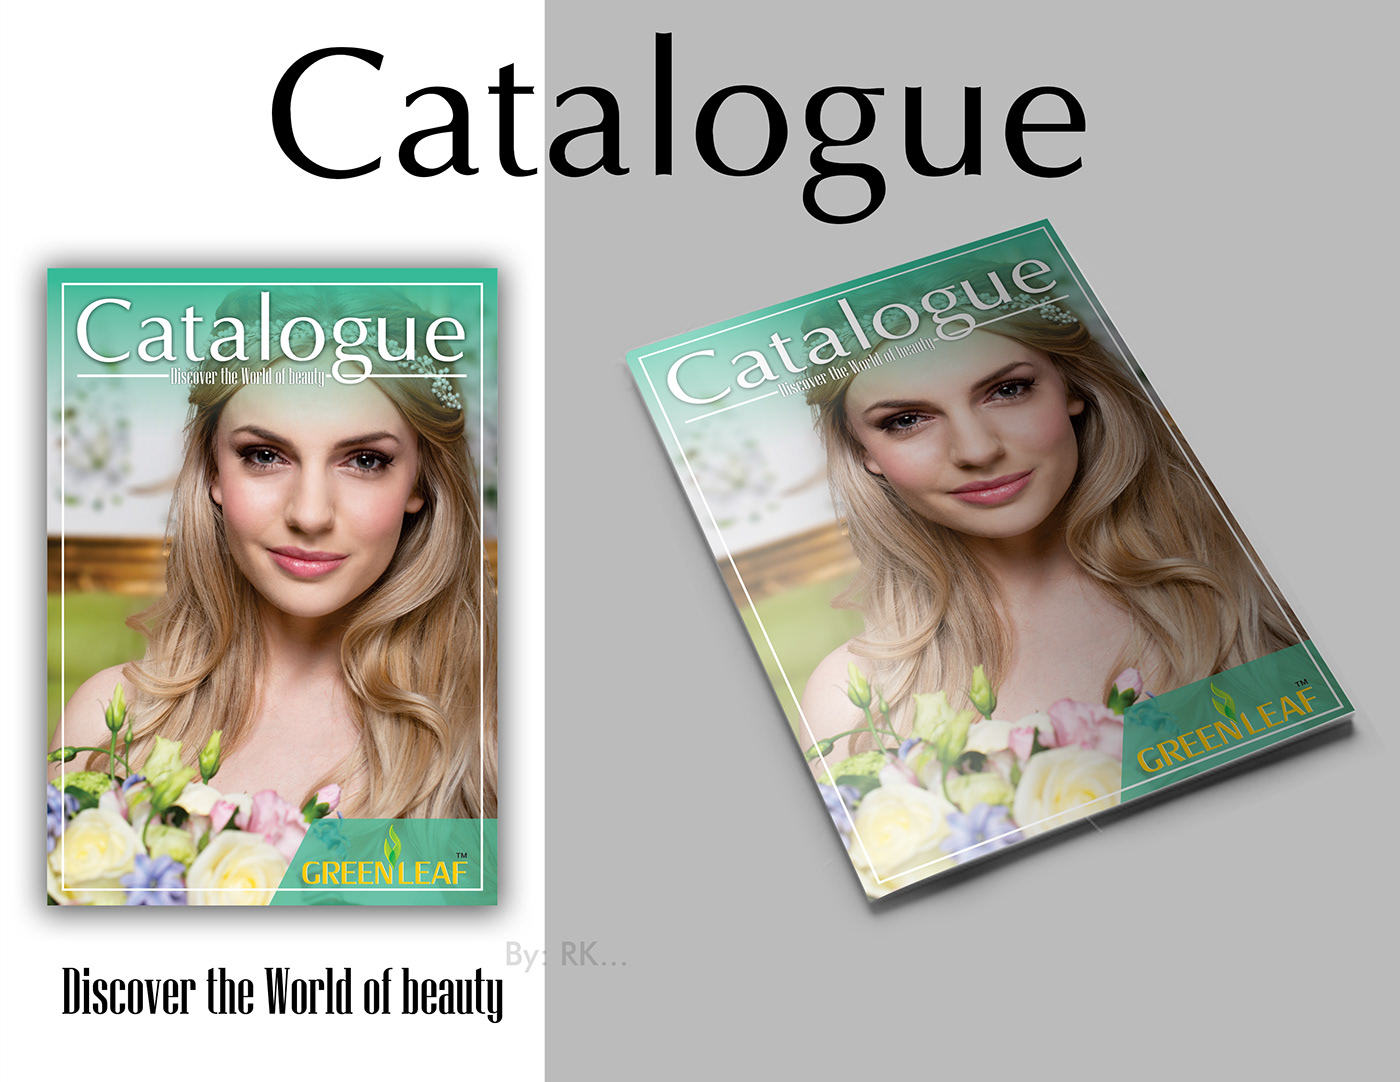 product-catalog catalog-of-cosmetic Product-Catalog-for-Cosmetic-Products-Company Cover-Design-for-The-Catalog catalog-cosmetic-layout